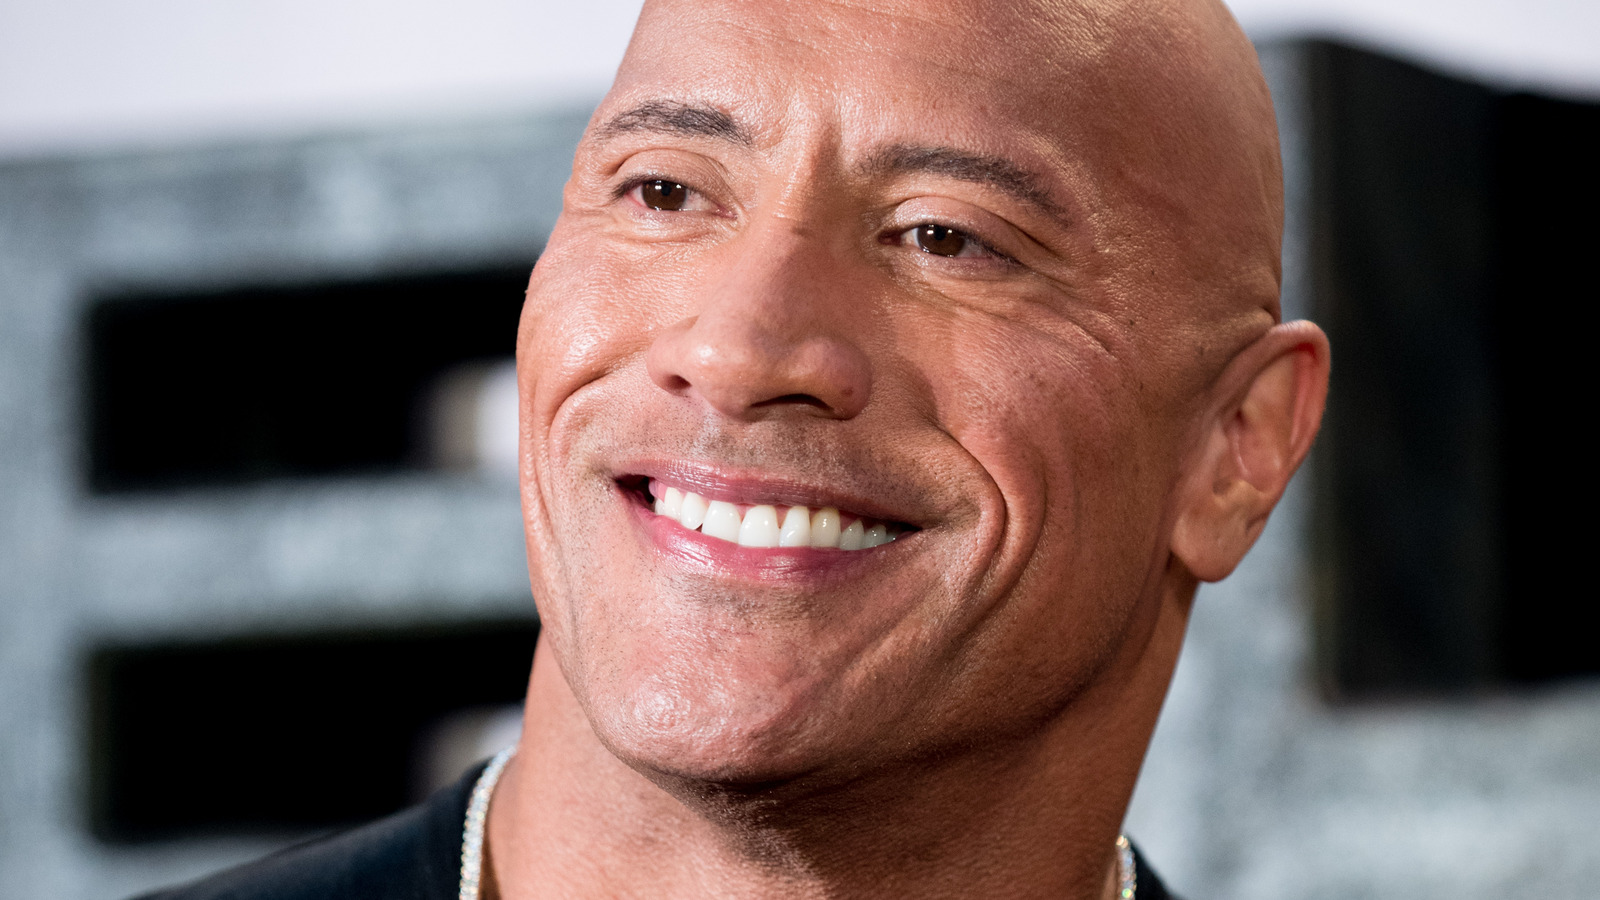 Not Even Dwayne Johnson Can Save 'Black Adam' From Its Rotten